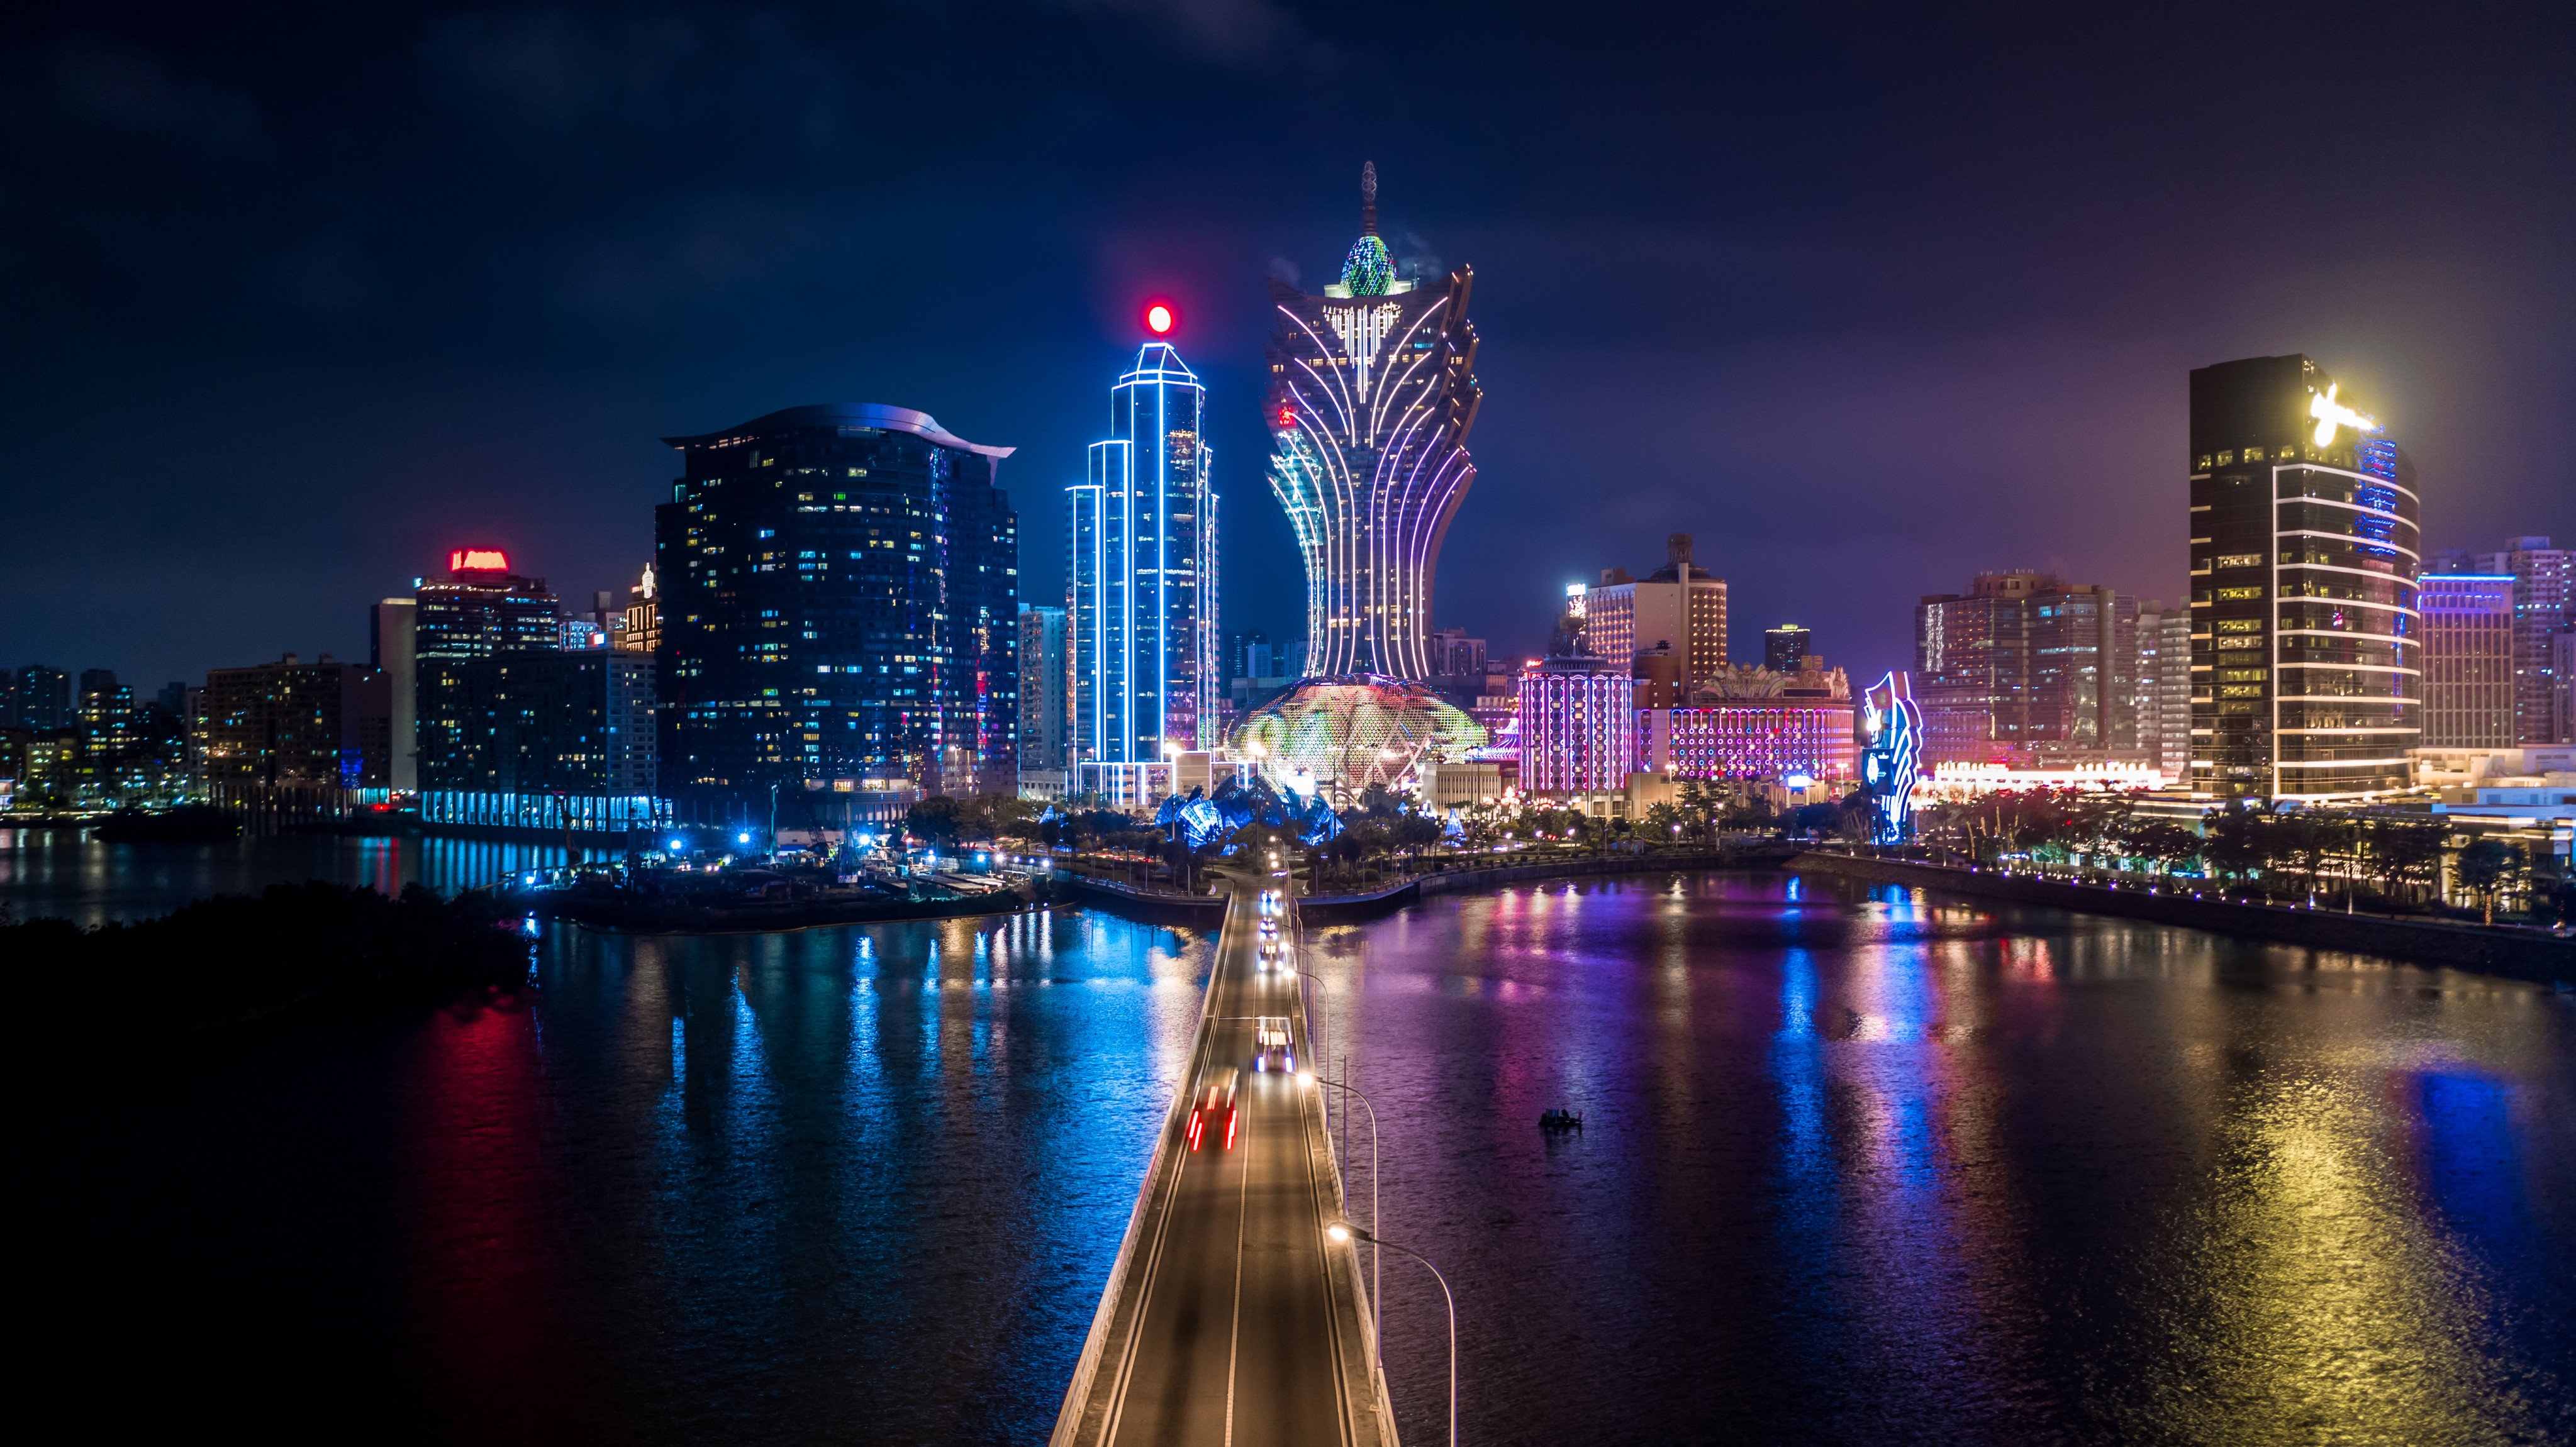 The Macau government collected about 13.96 billion patacas (US$1.73 billion) from direct gambling taxes in the first seven months of 2022. Photo: Shutterstock